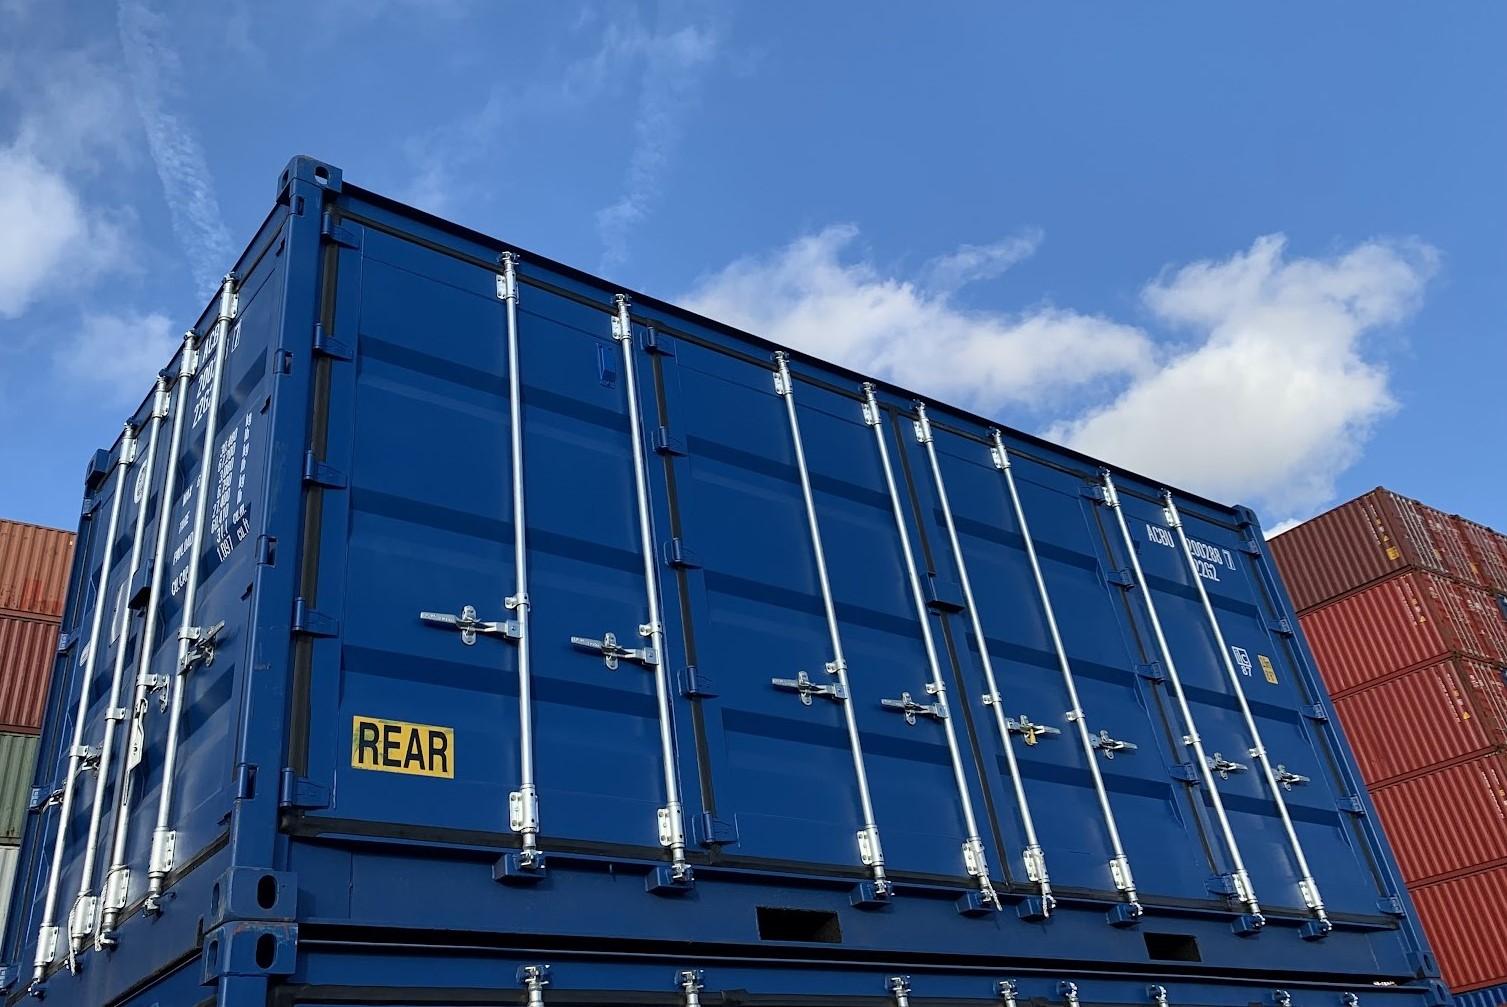 20 foot new dark blue open side special container available at depot for sale or rent at ContainerID